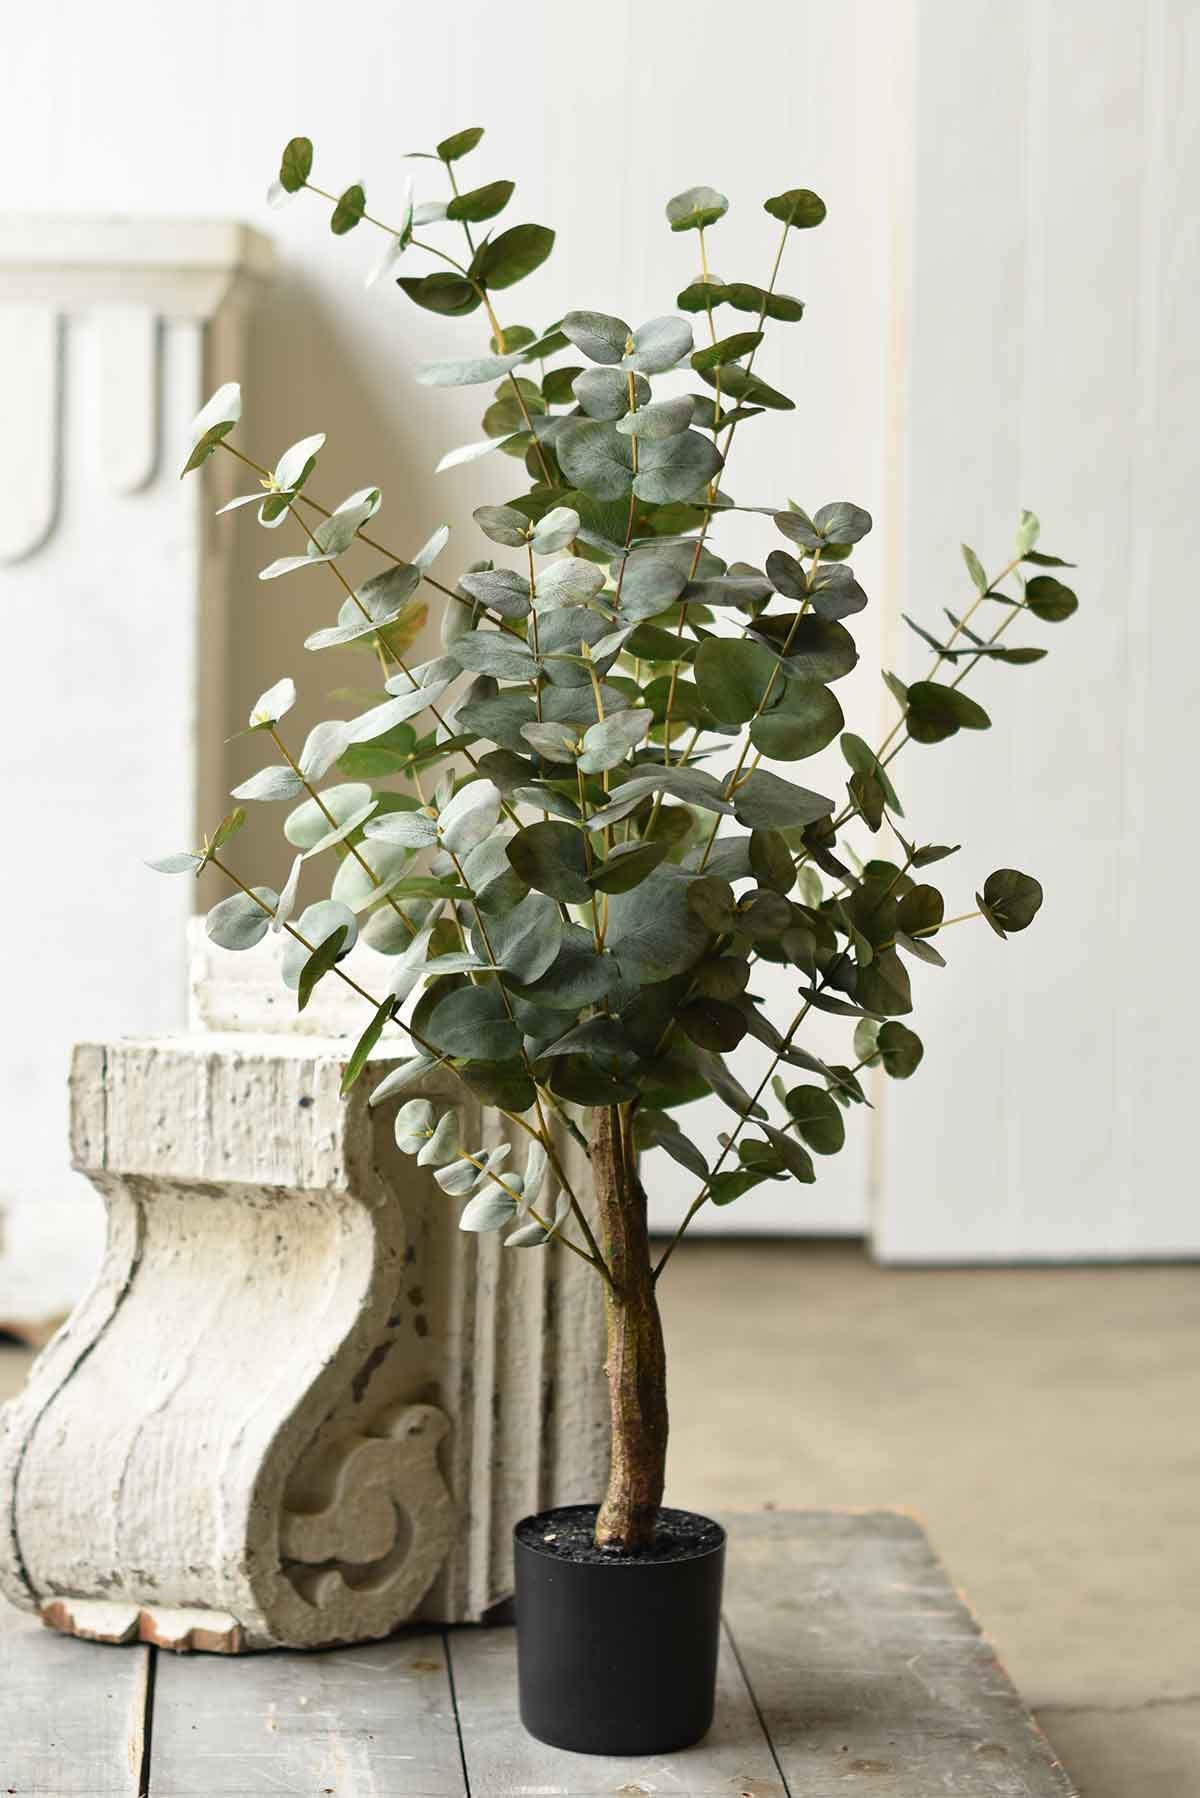 Artificial Plant, tree with Natural Logs, for Home Decoration, Bamboo,  Ficus, Wisteria, Olive, Eucalyptus, Almond